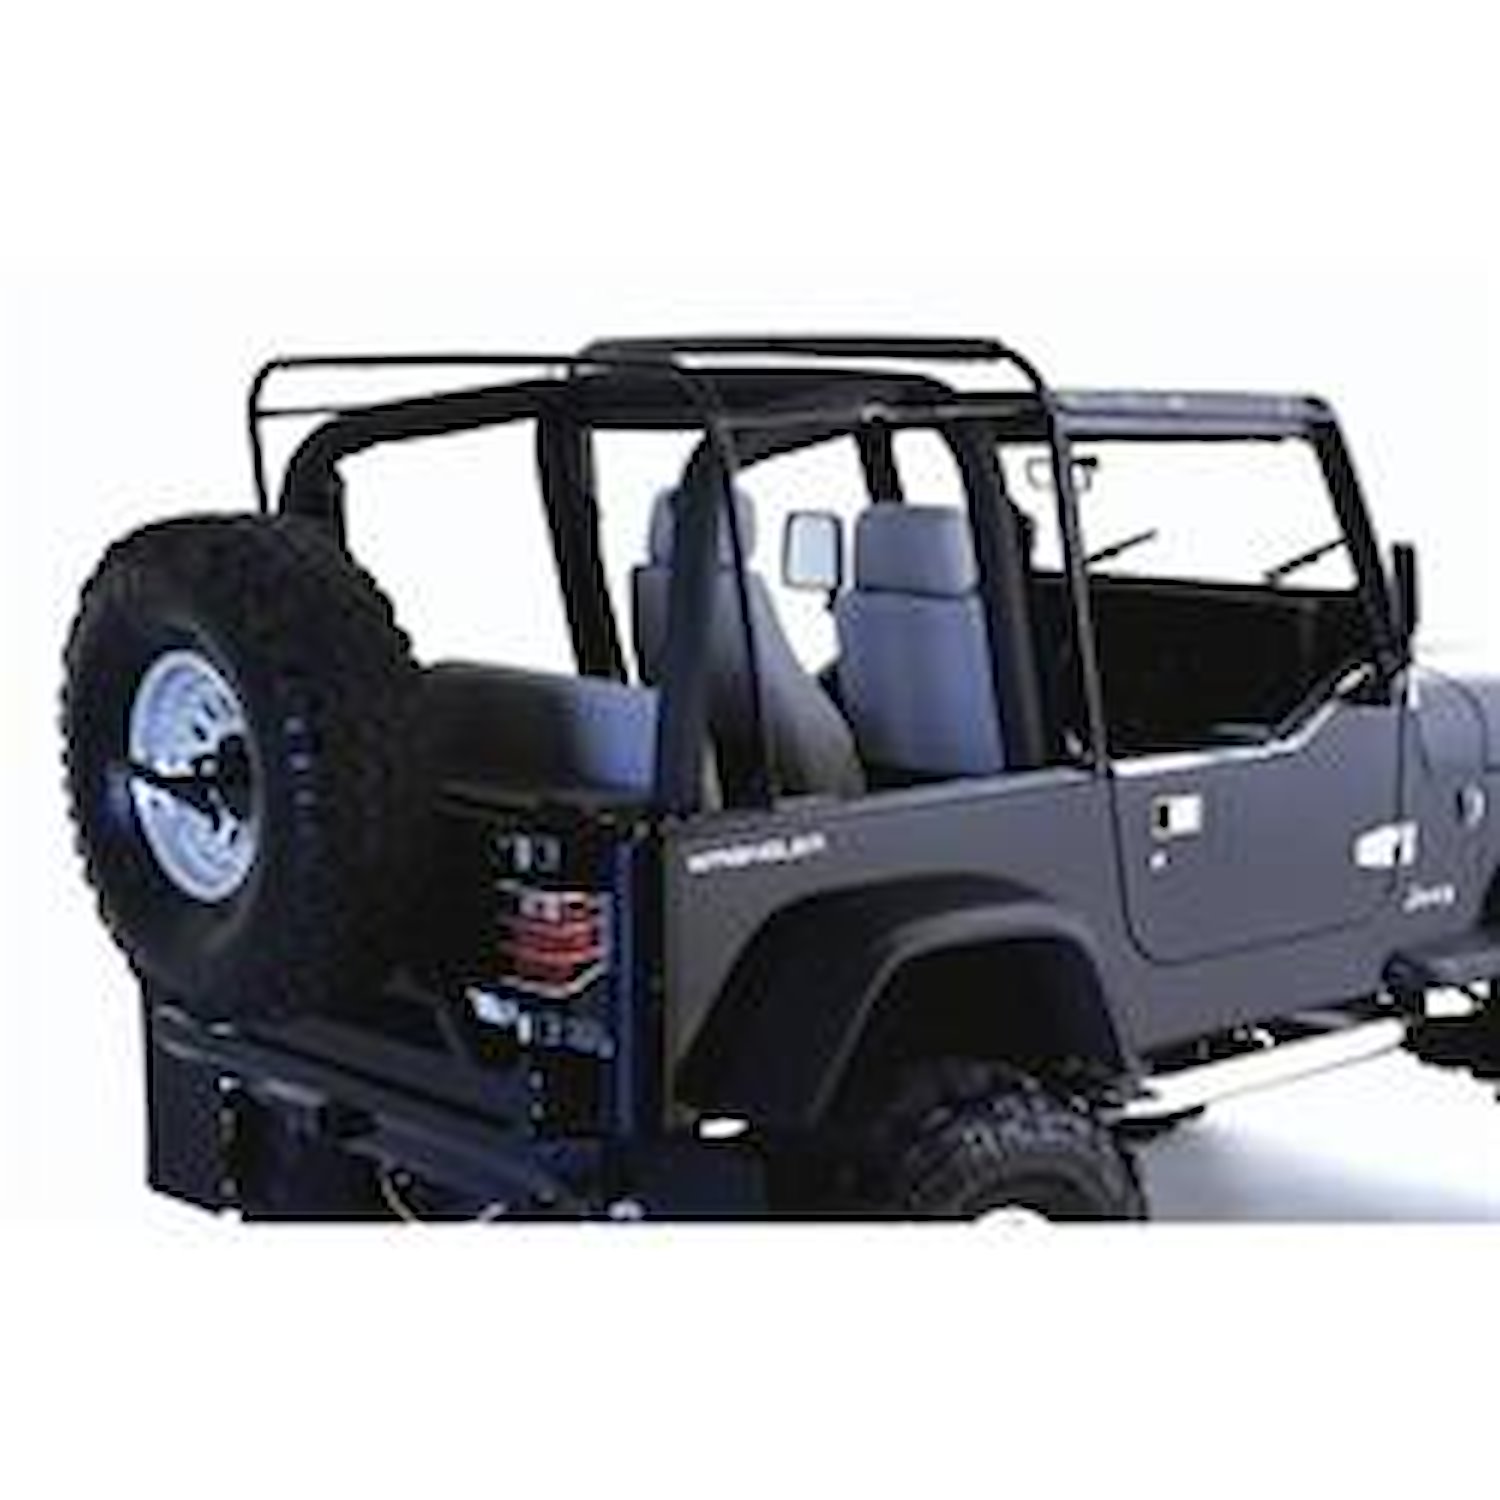 SOFT TOP REPLACEMENT HARDWARE 87-95 WRANGLER